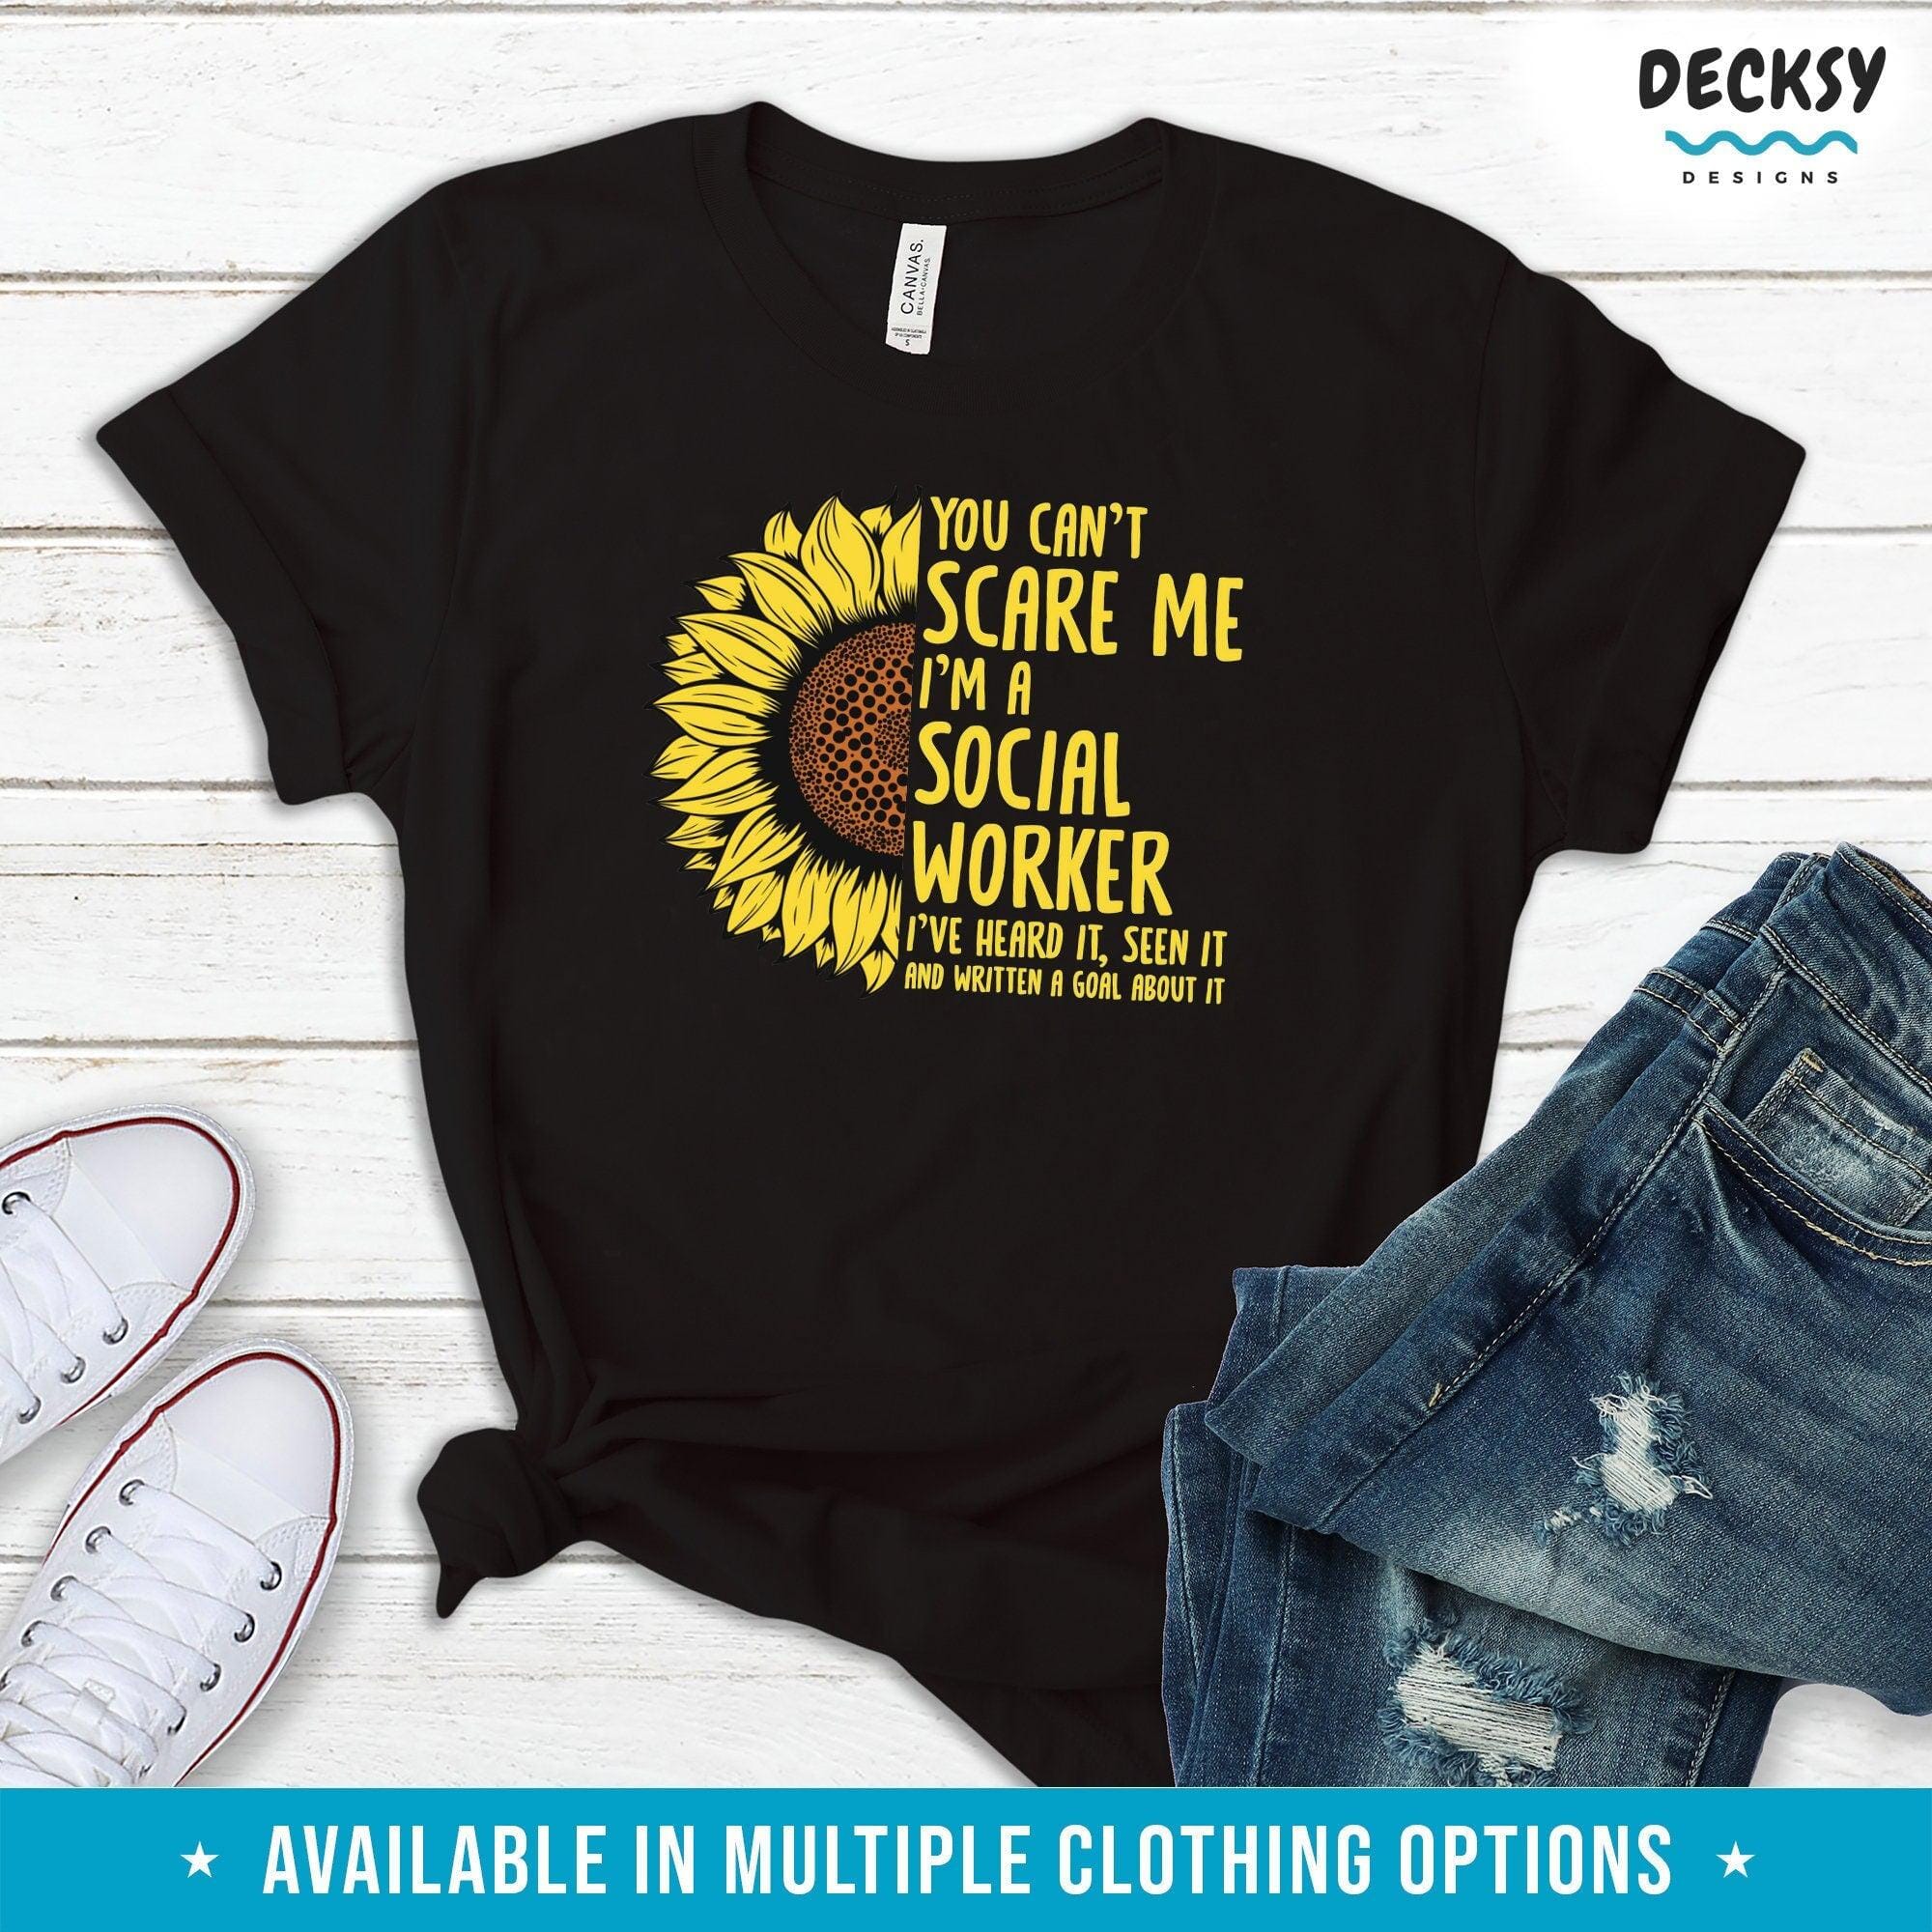 Social Worker Tshirt, Social Work Gift-Clothing:Gender-Neutral Adult Clothing:Tops & Tees:T-shirts:Graphic Tees-DecksyDesigns